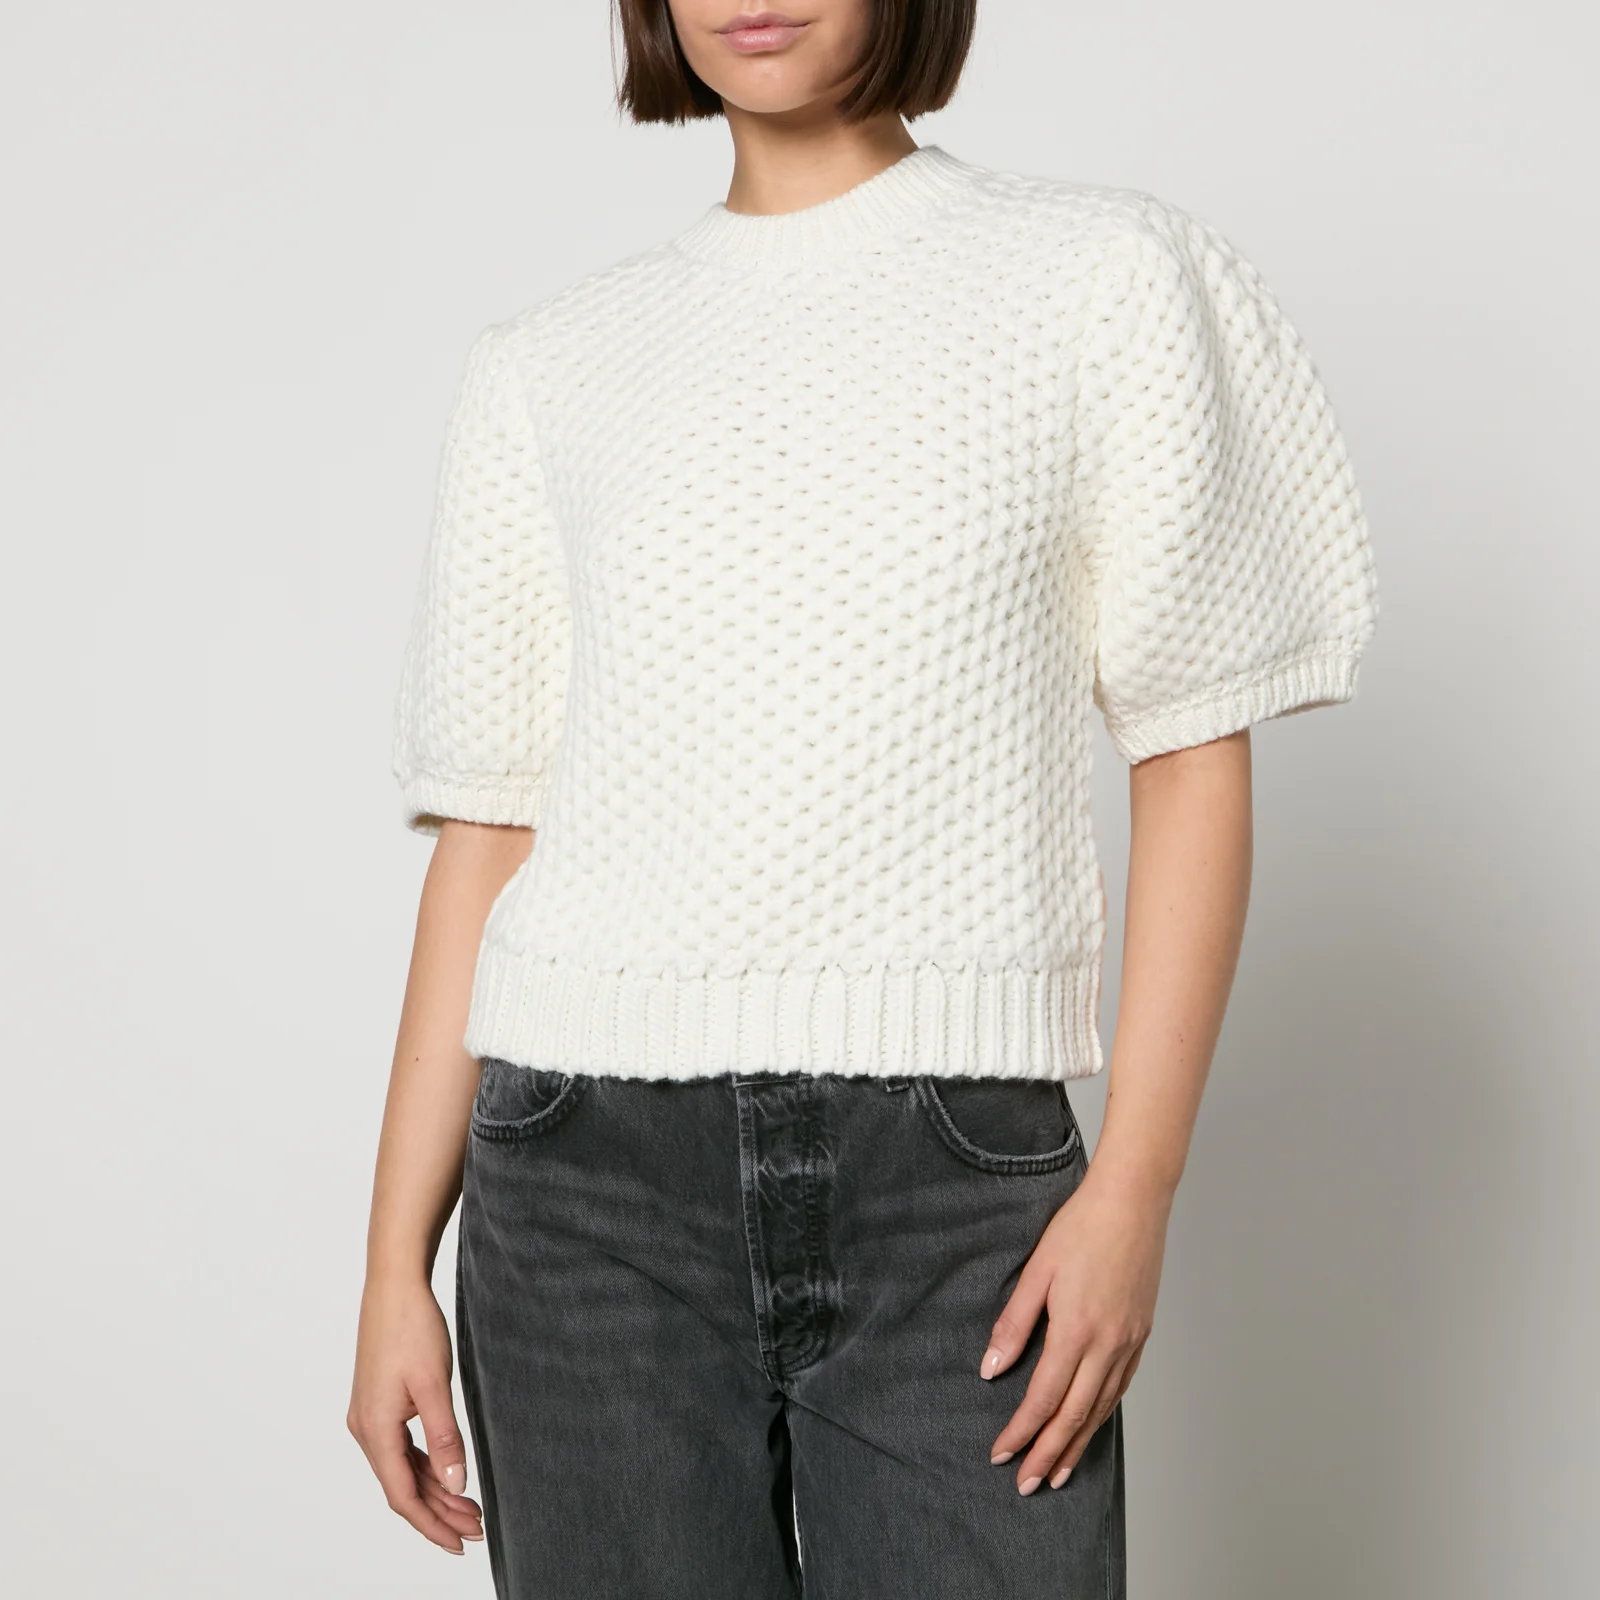 Anine Bing Brittany Wool-Blend Sweater - XS Image 1